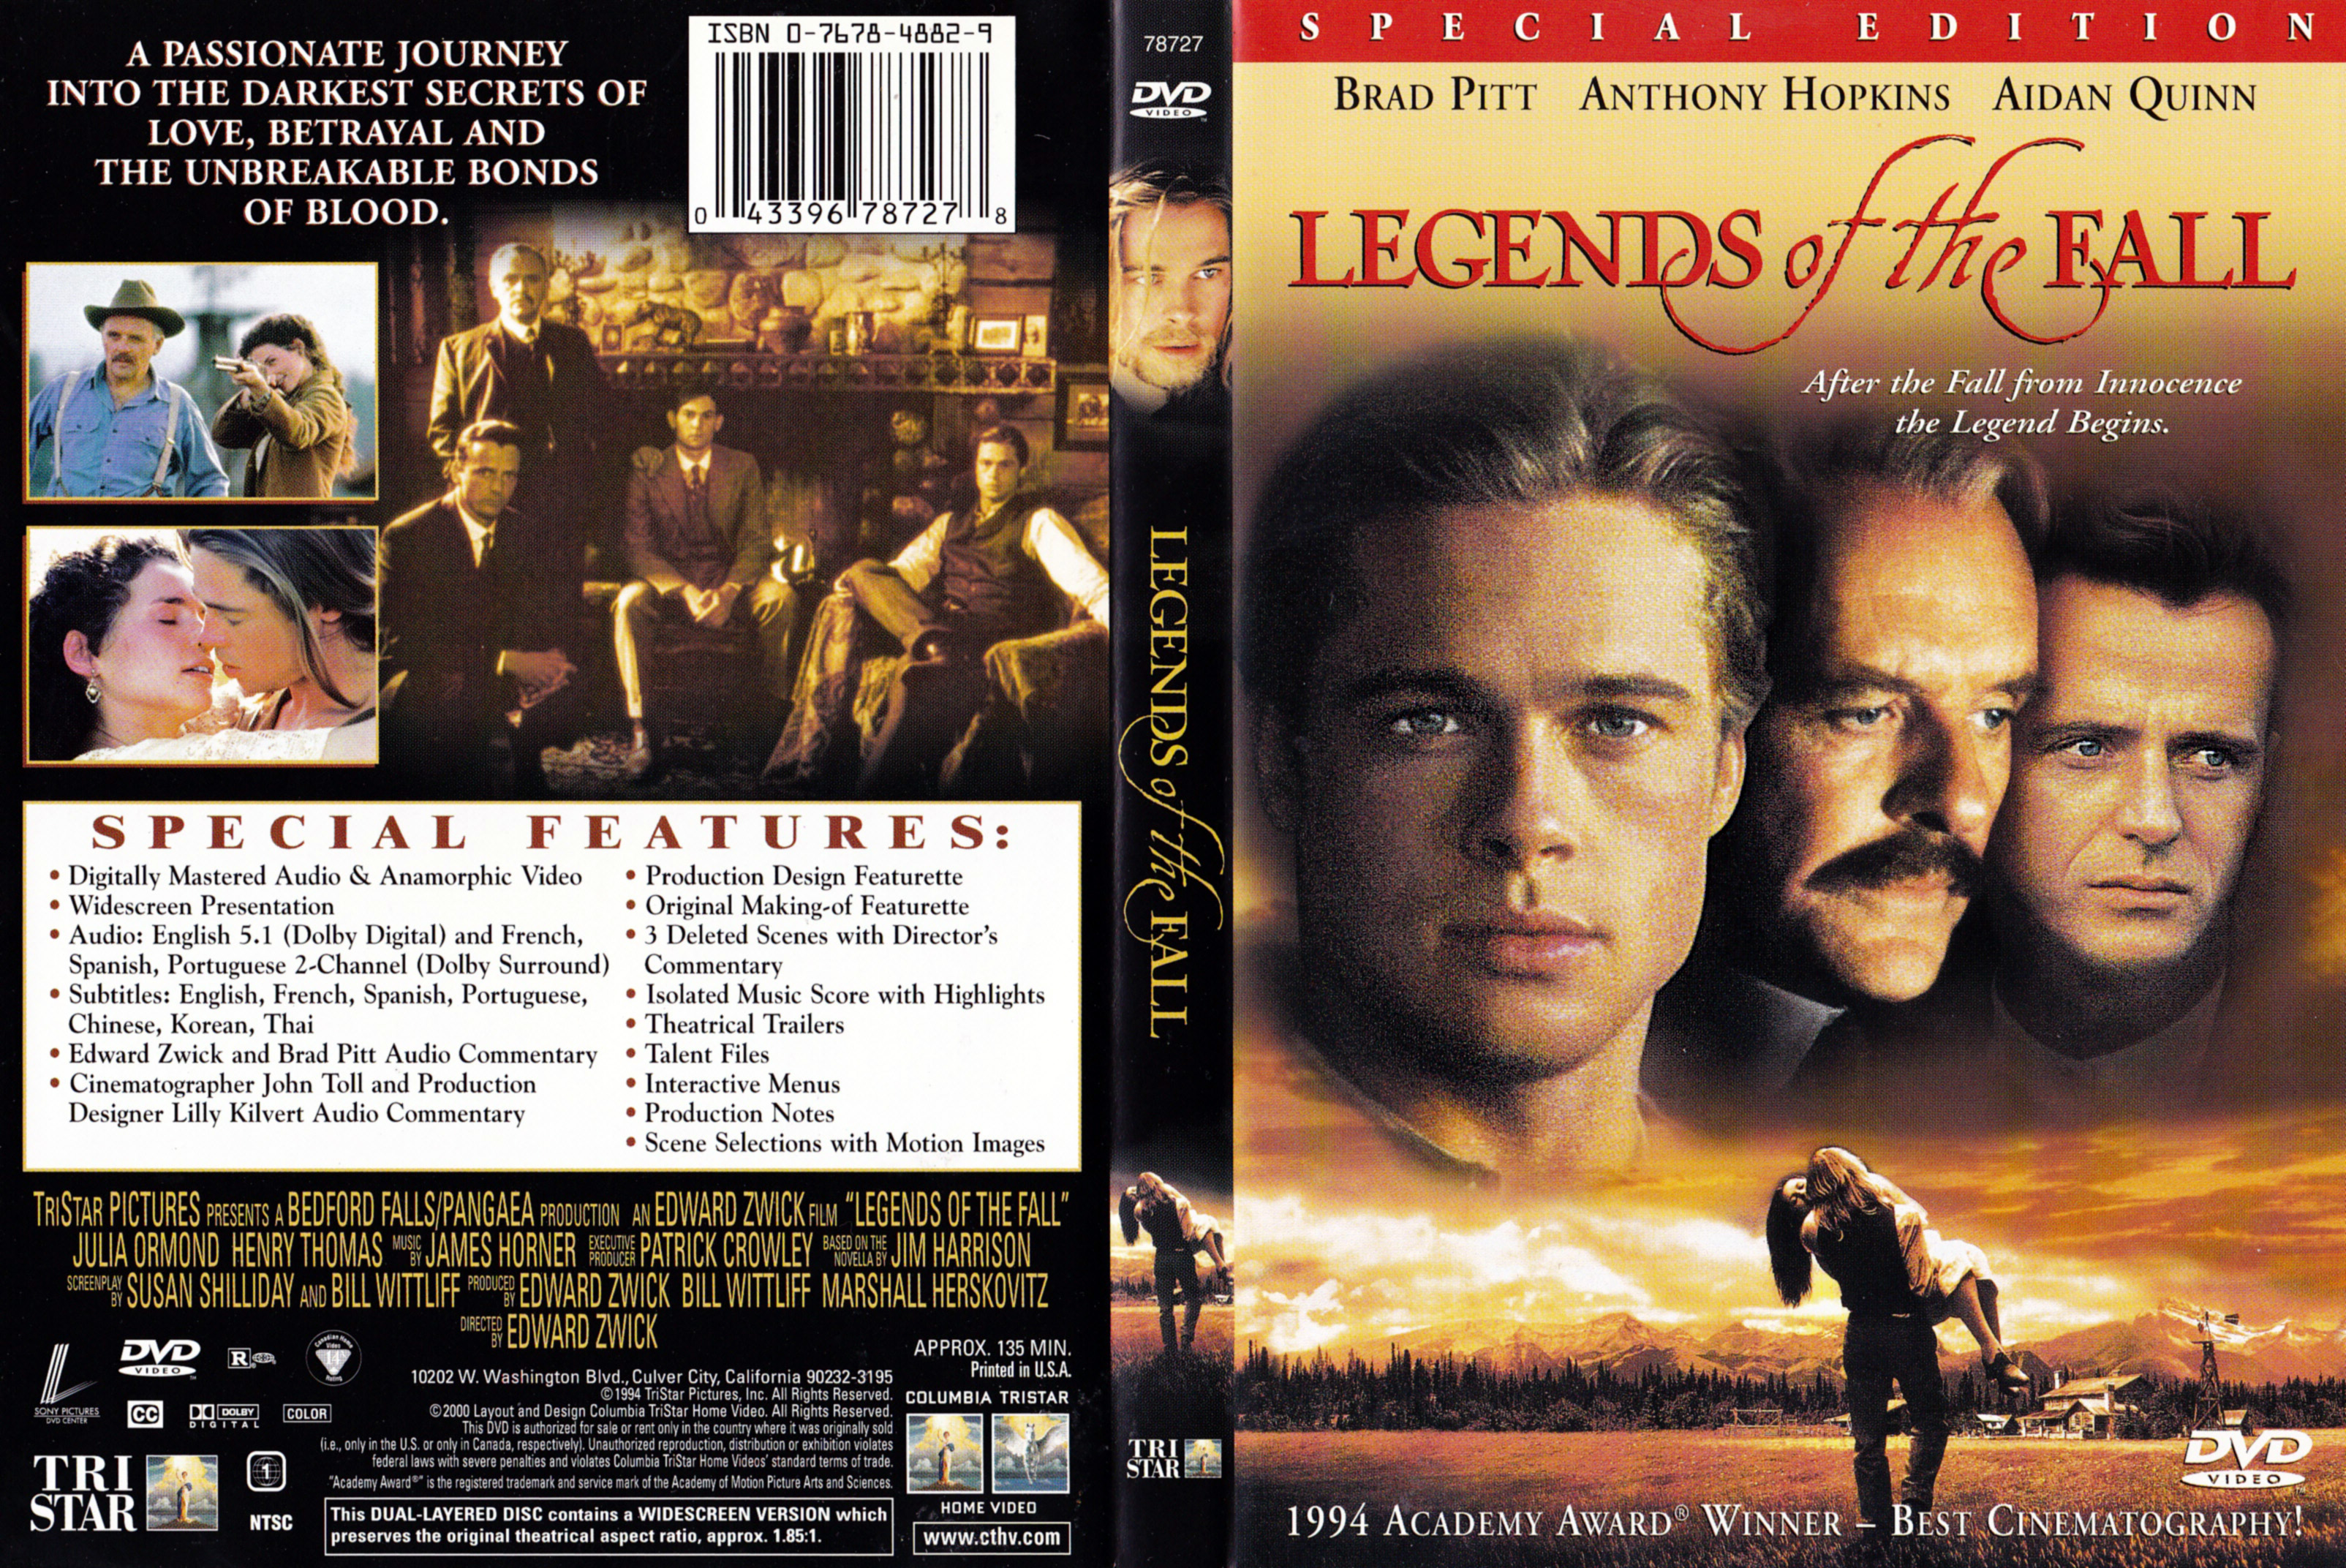 Jaquette DVD Legends of the fall (Canadienne)